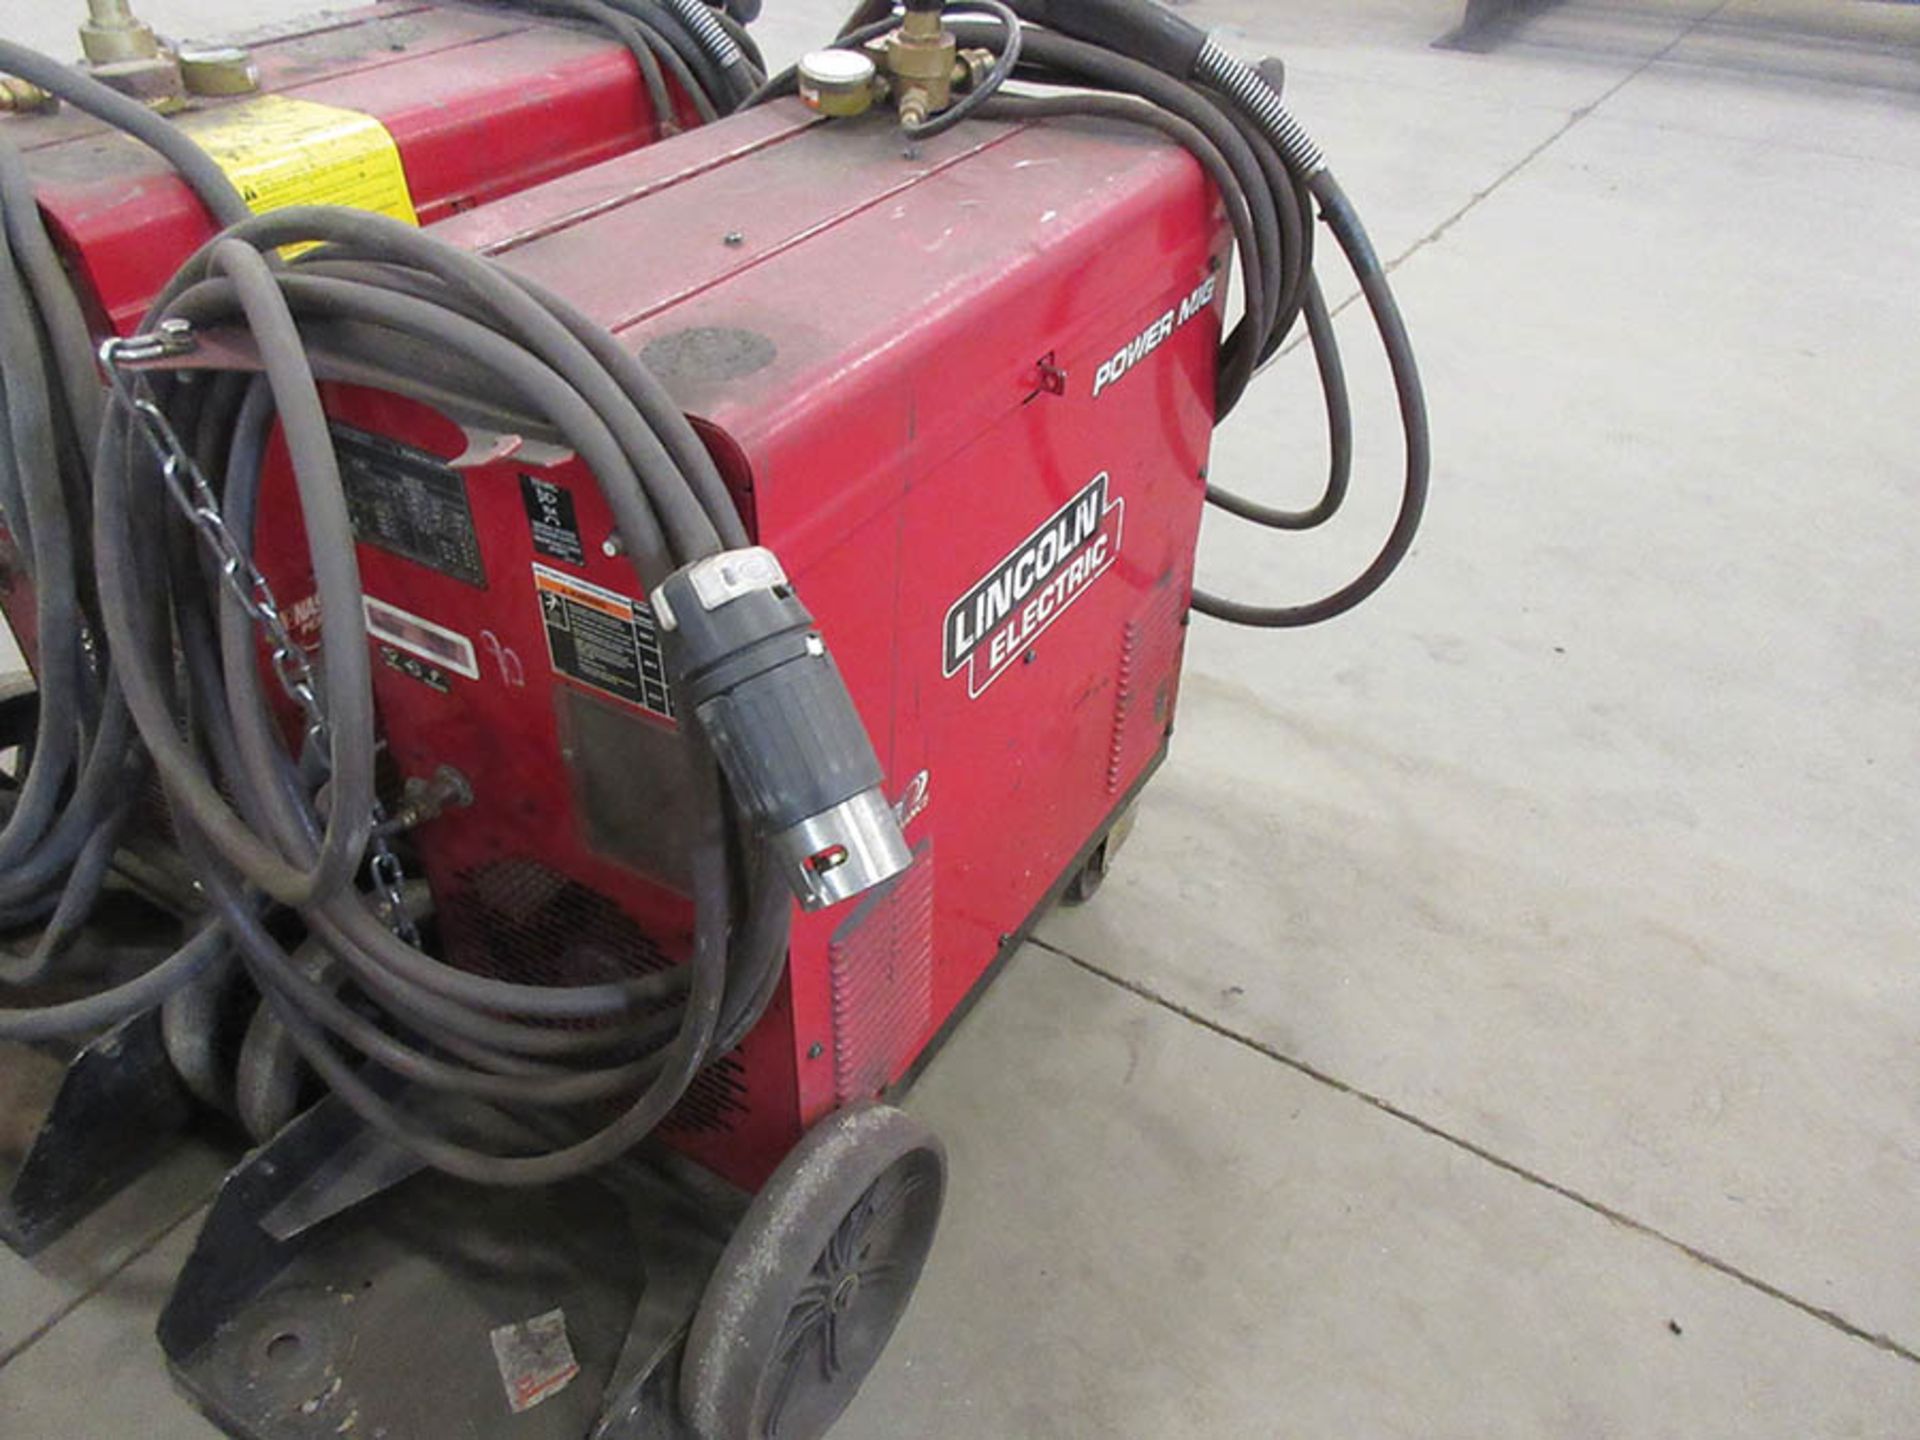 LINCOLN ELECTRIC 350MP POWER MIG WELDER WITH TWECO WELDSKILL MIG GUN, #90 - Image 2 of 3